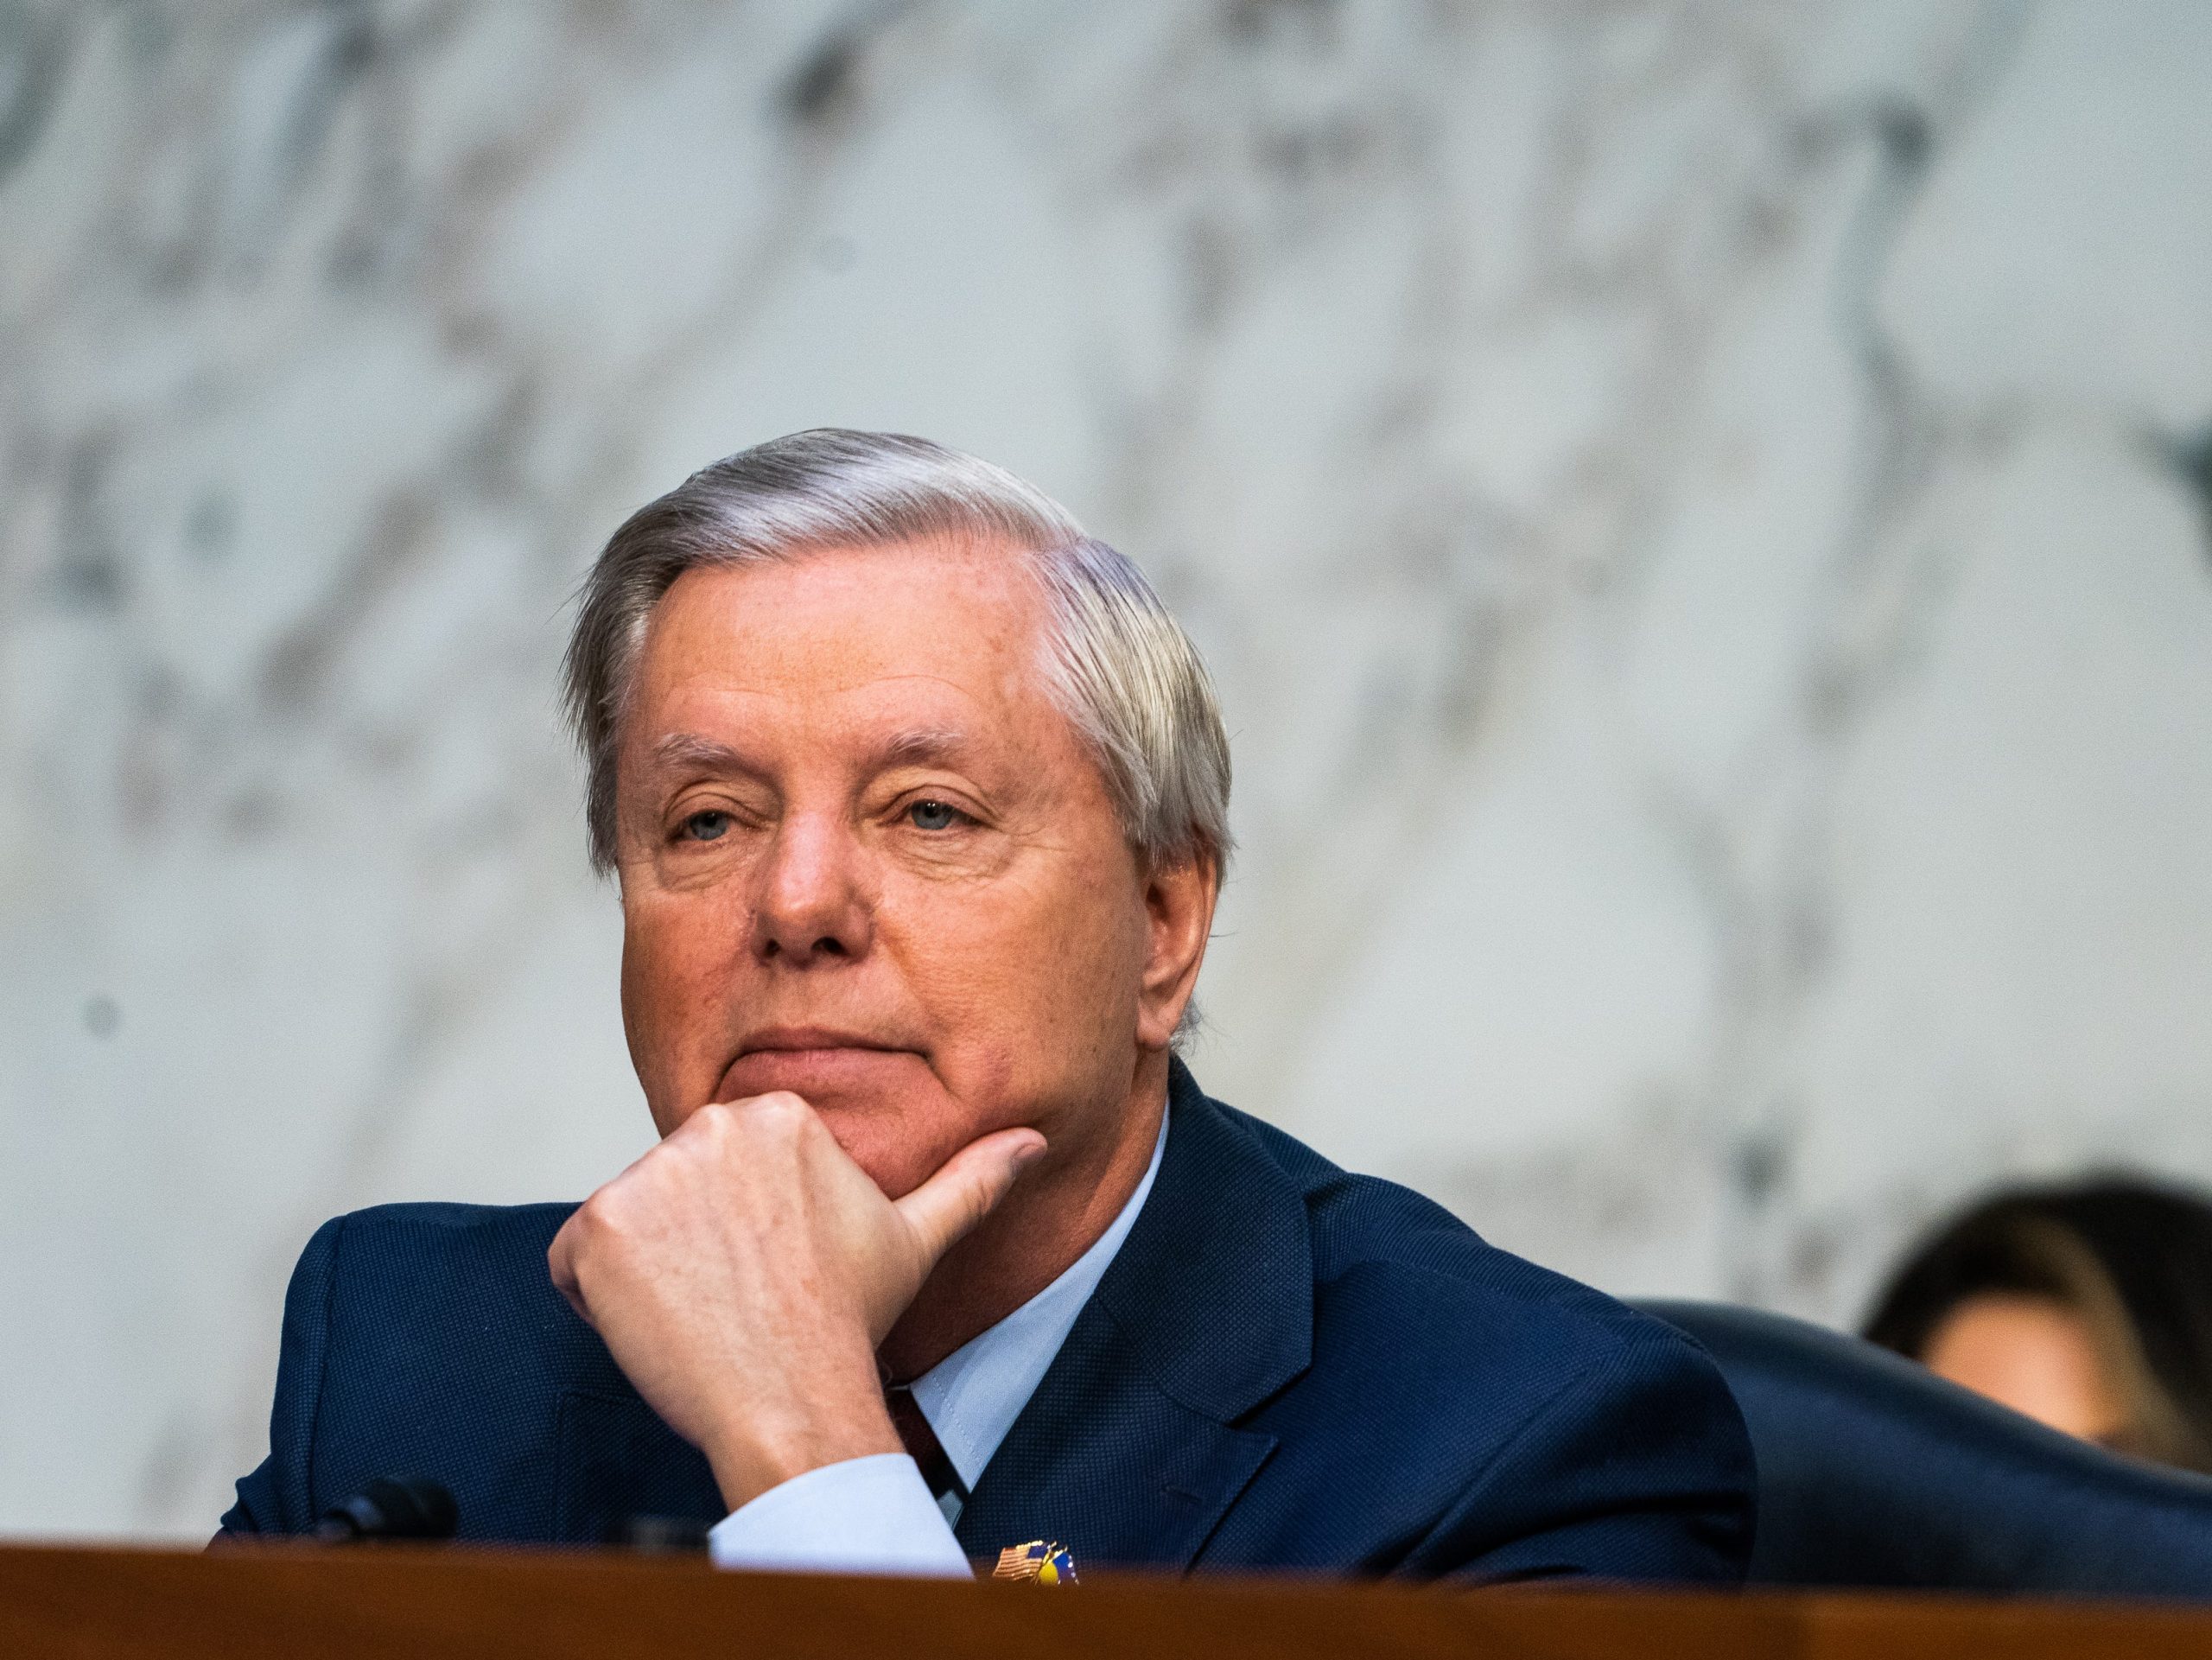 Lindsey Graham says same-sex marriage should be left to the states but pivots from question on interracial marriage